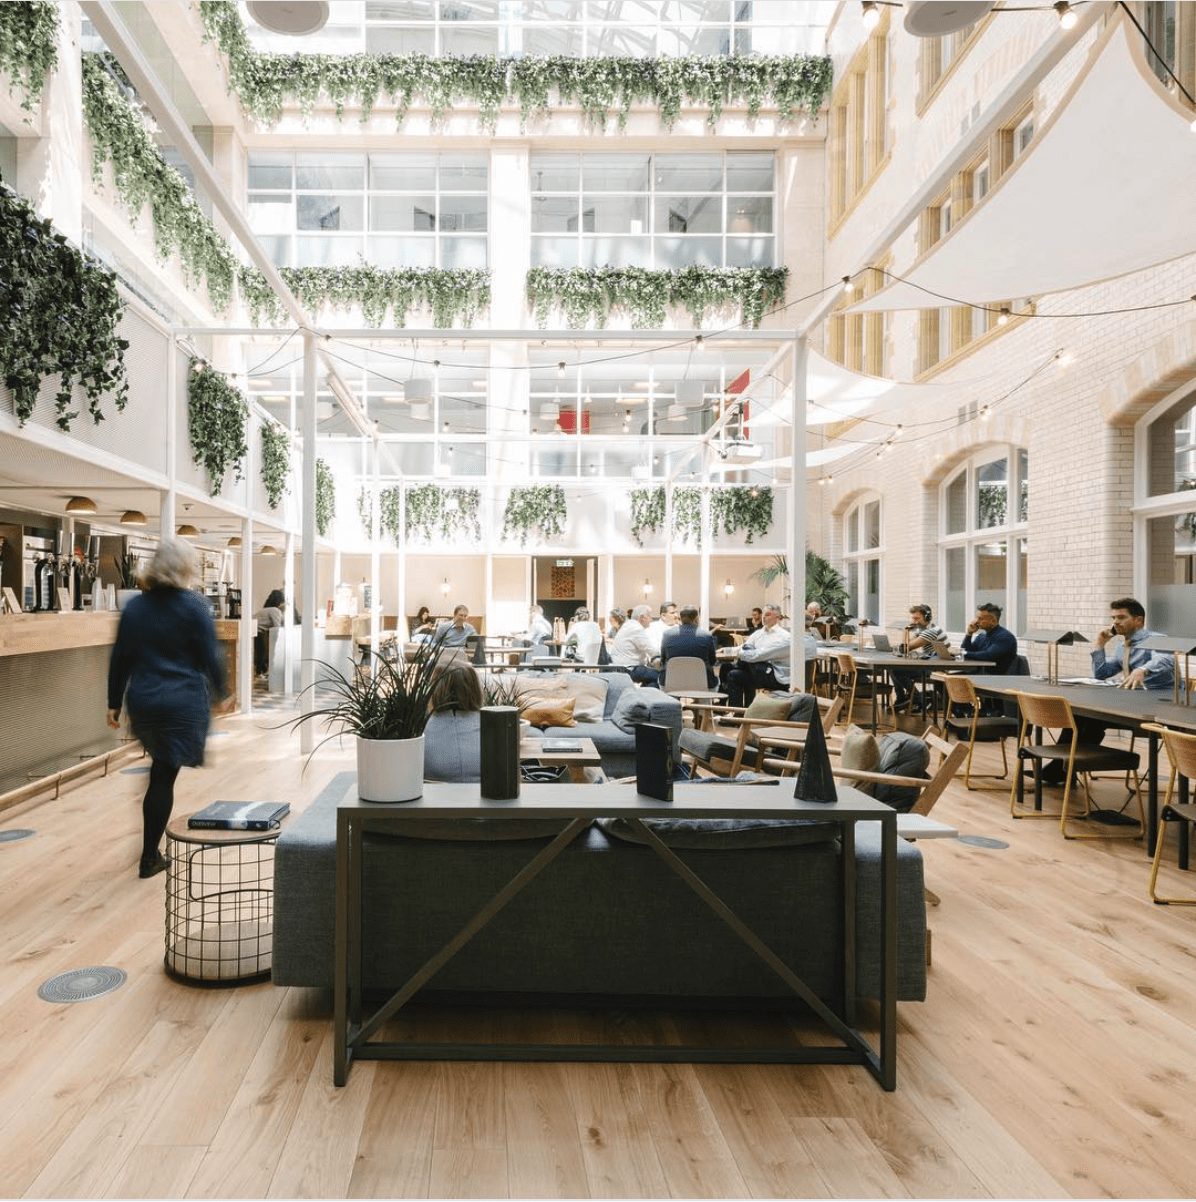 10 of the best coworking spaces in London